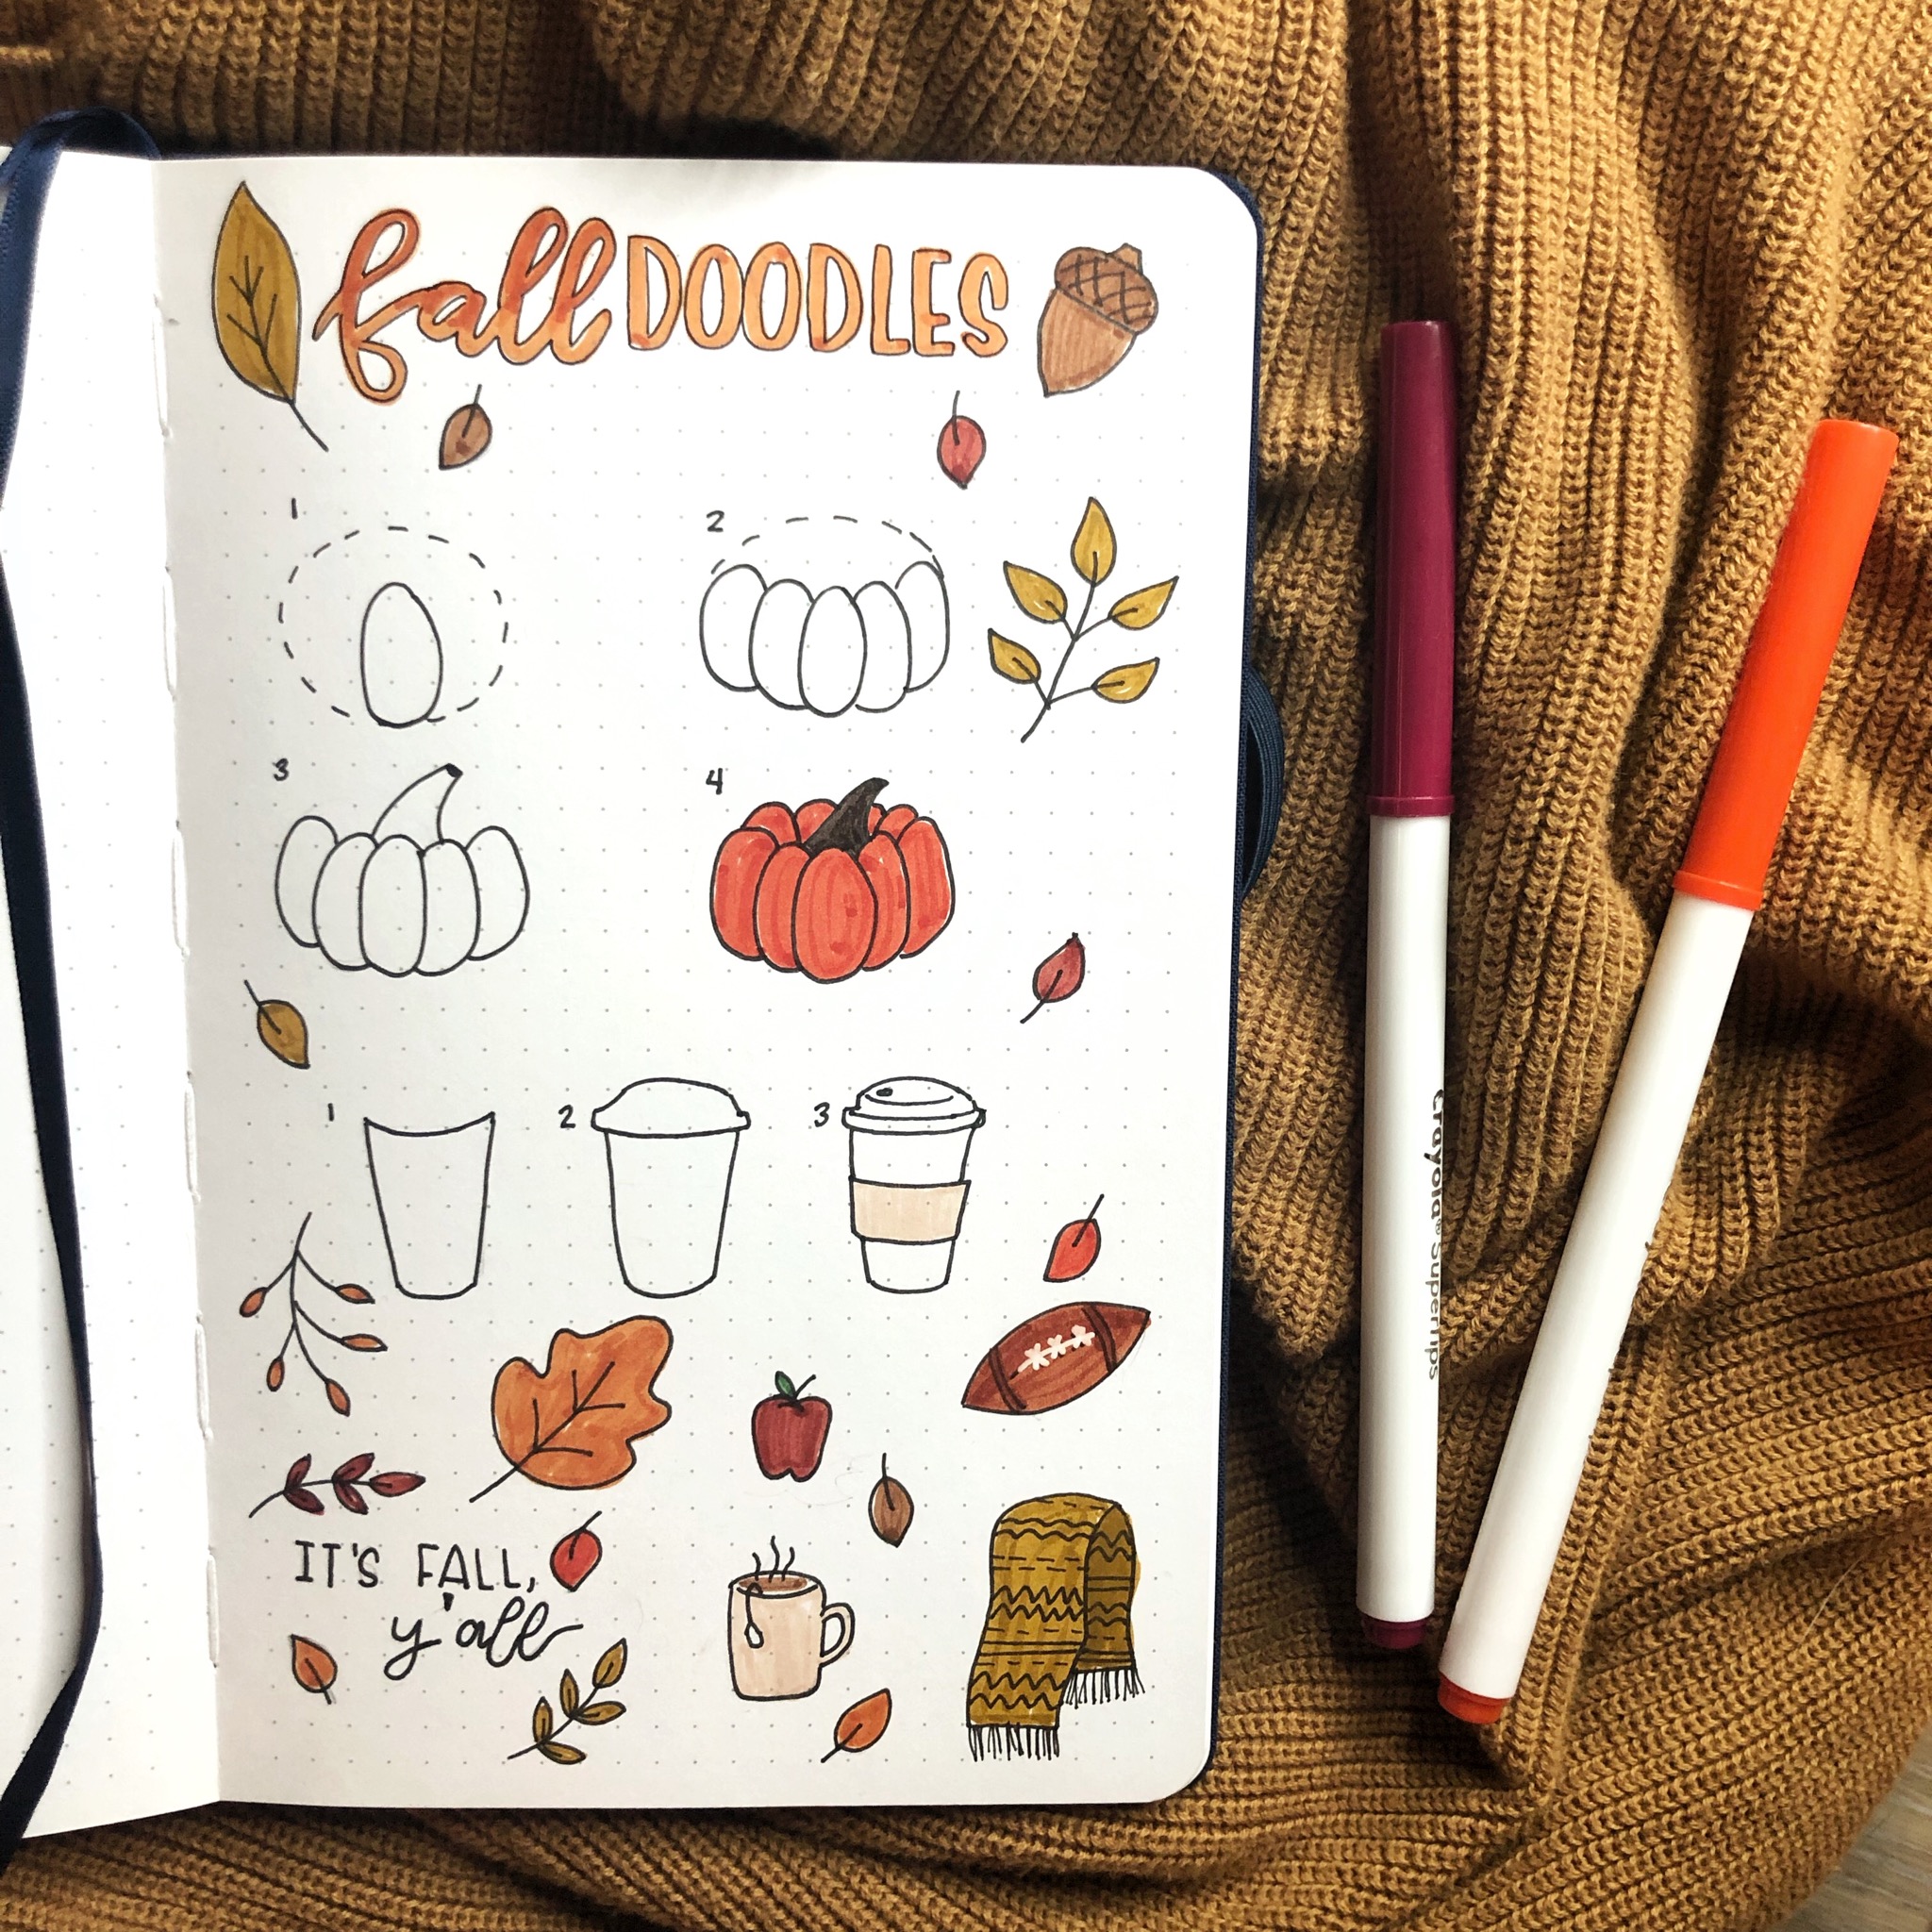 Fall Doodles Tutorial - Rae's Daily Page